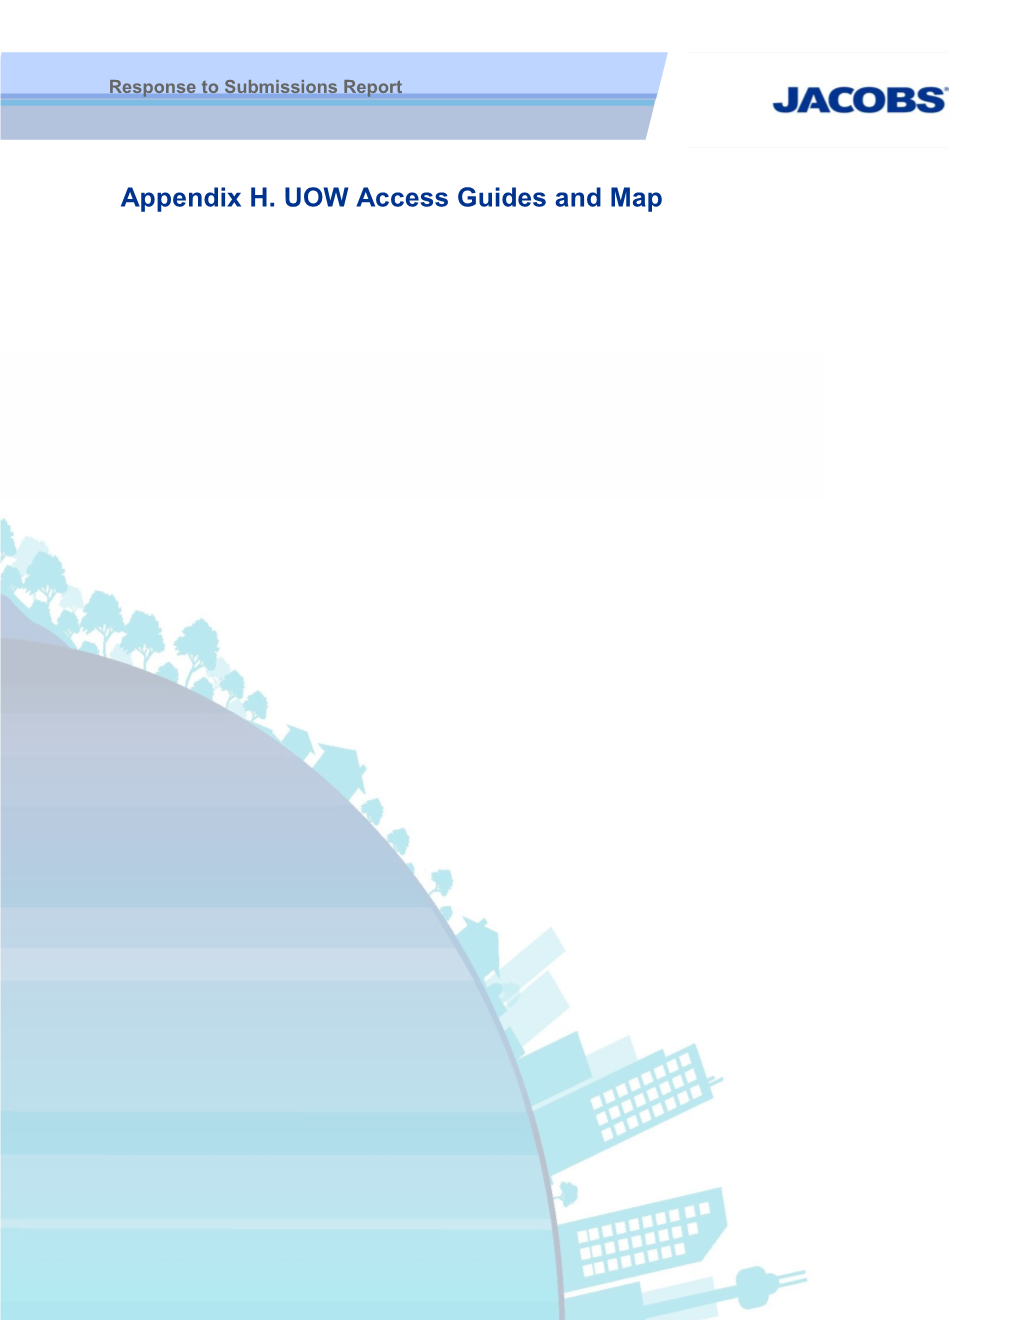 Appendix H. UOW Access Guides and Map